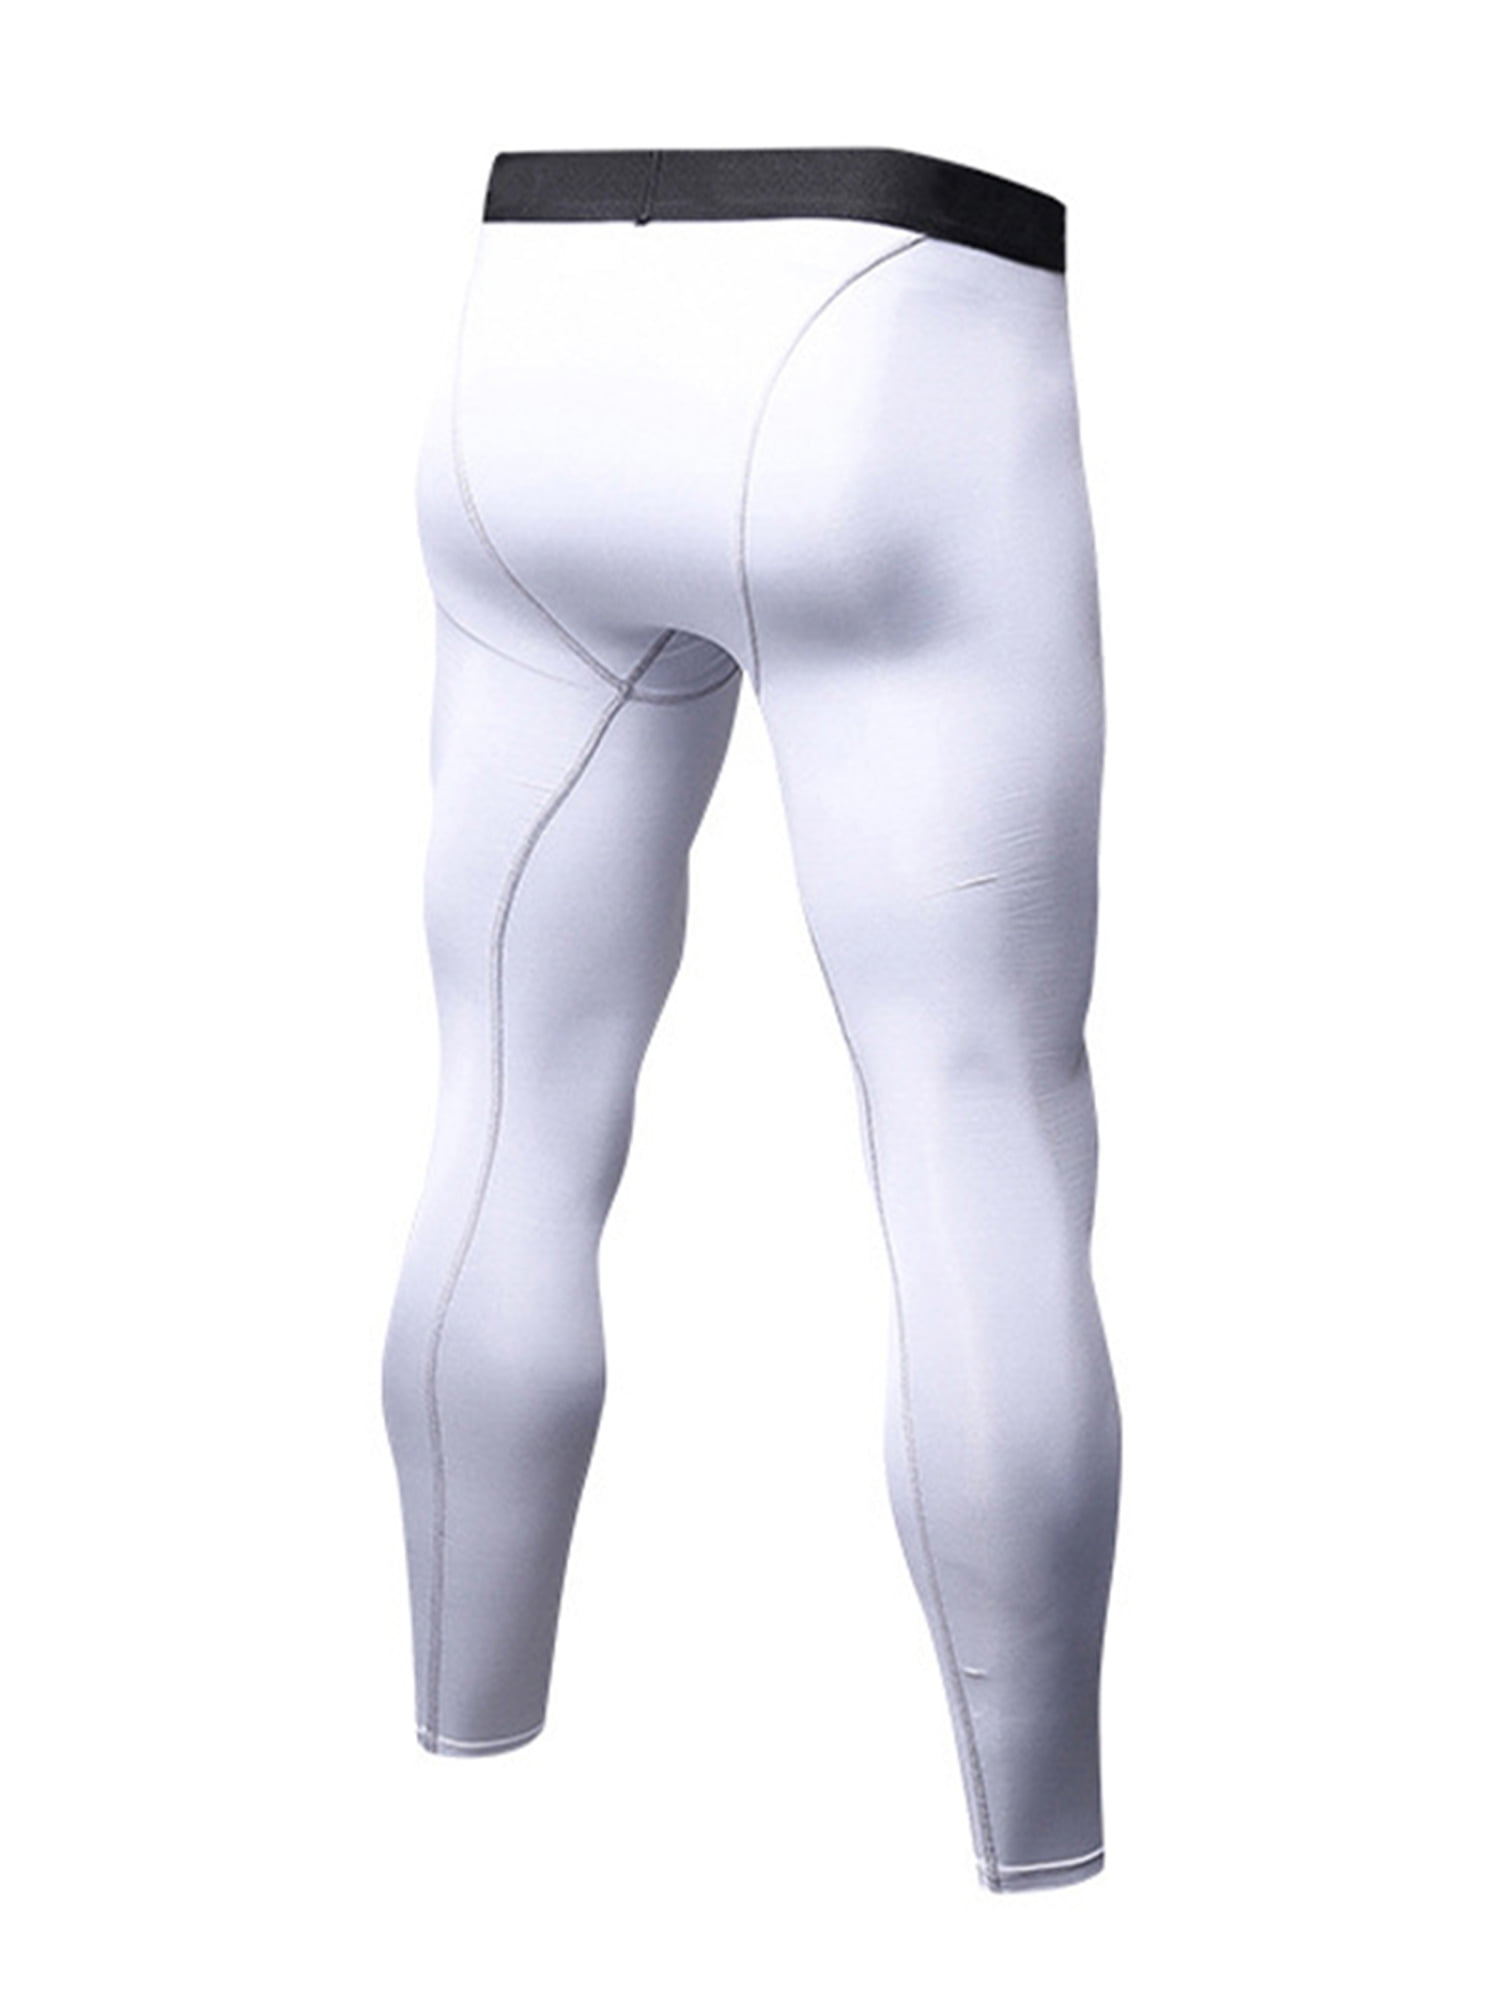 Glonme Mens Compression Pants Elastic Waist Tights Solid Color Base Layer  Workout Stretch Sport Pant Sweat-wicking Quick Dry Leggings White M